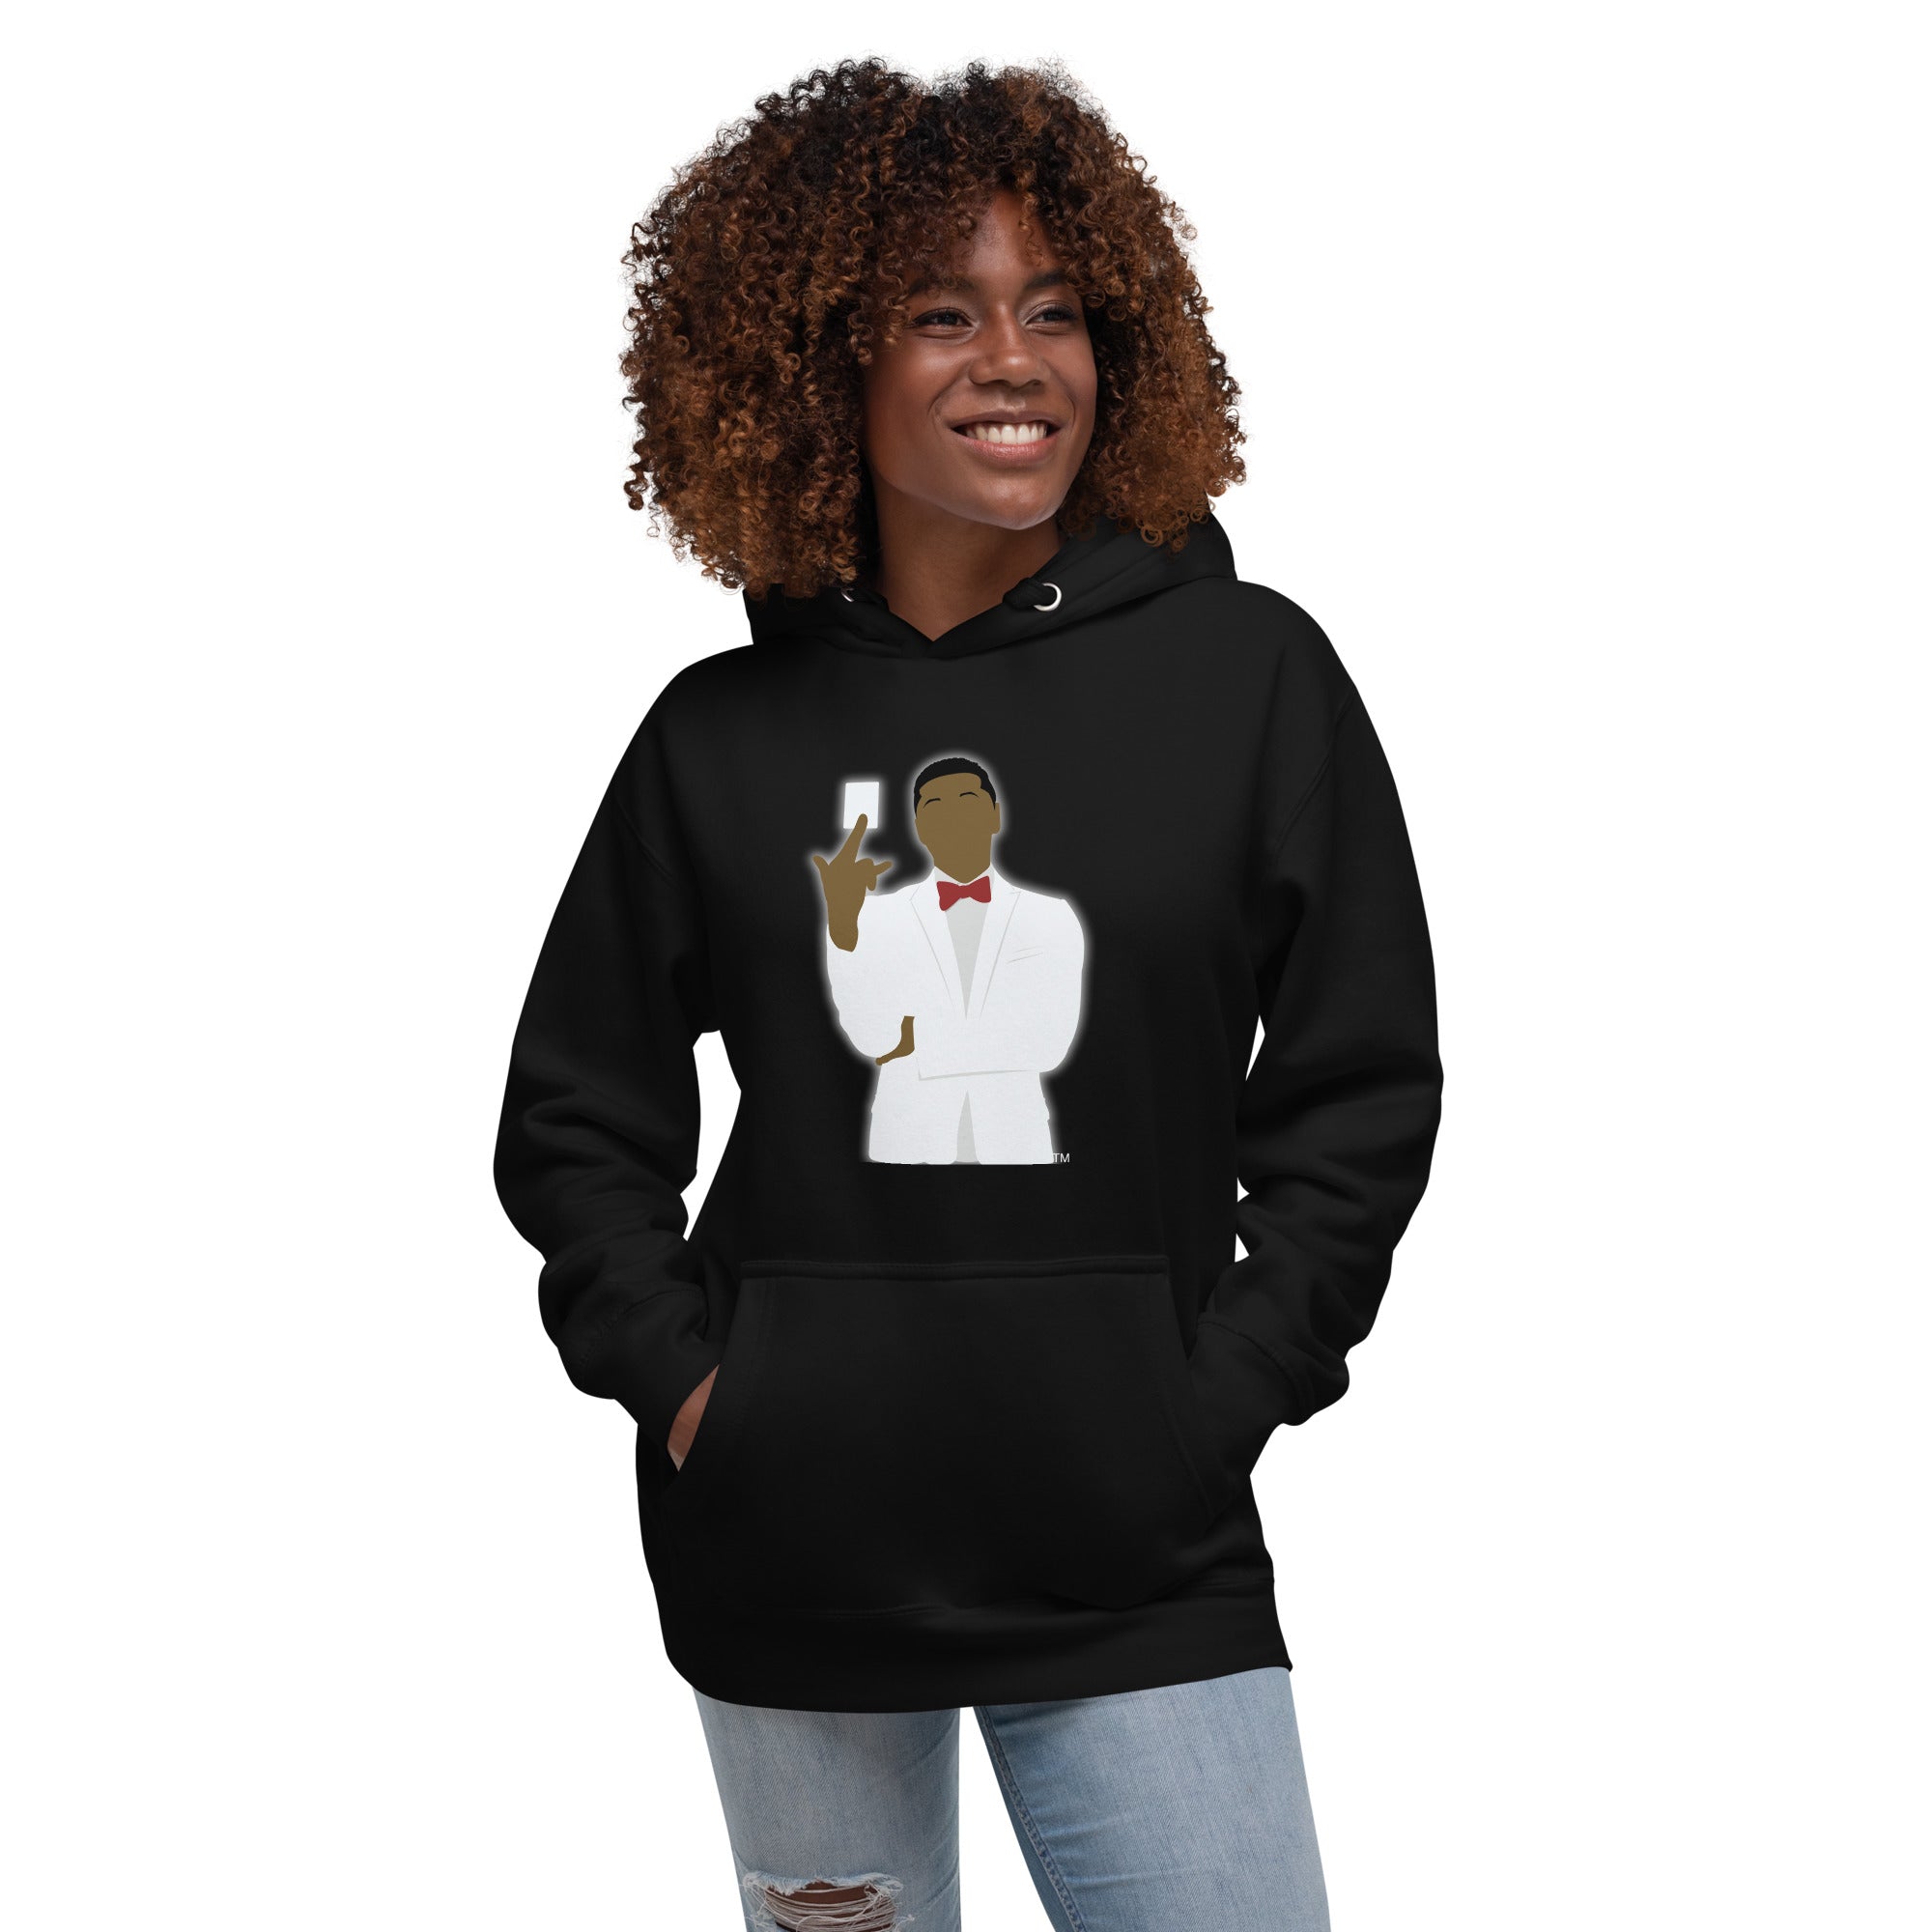 "Exactly How It's `Posed to Be" Logo Unisex Hoodie